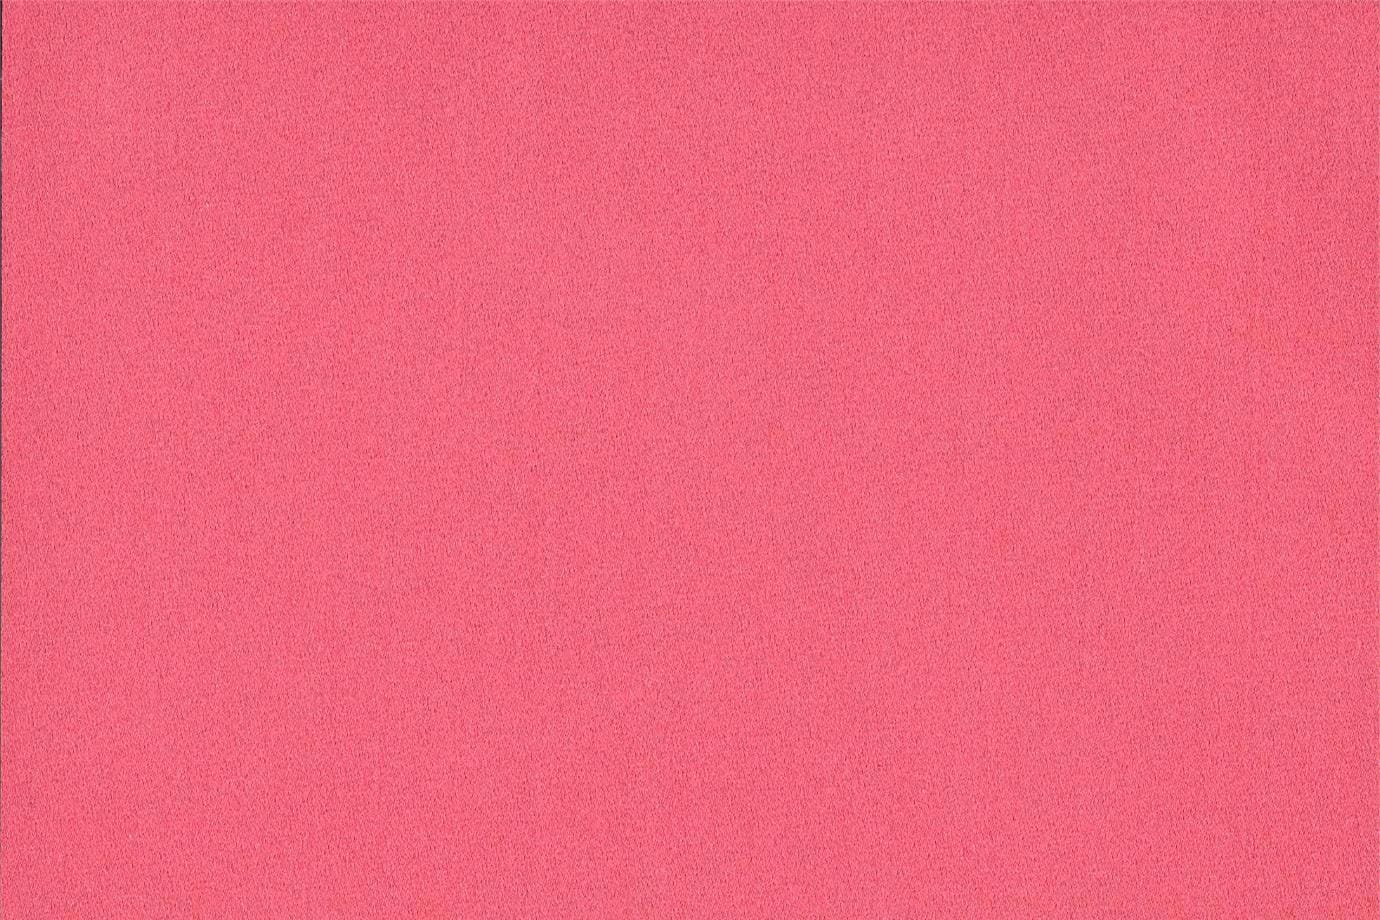 J1594 MEO PATACCA 015 Rosa home decoration fabric